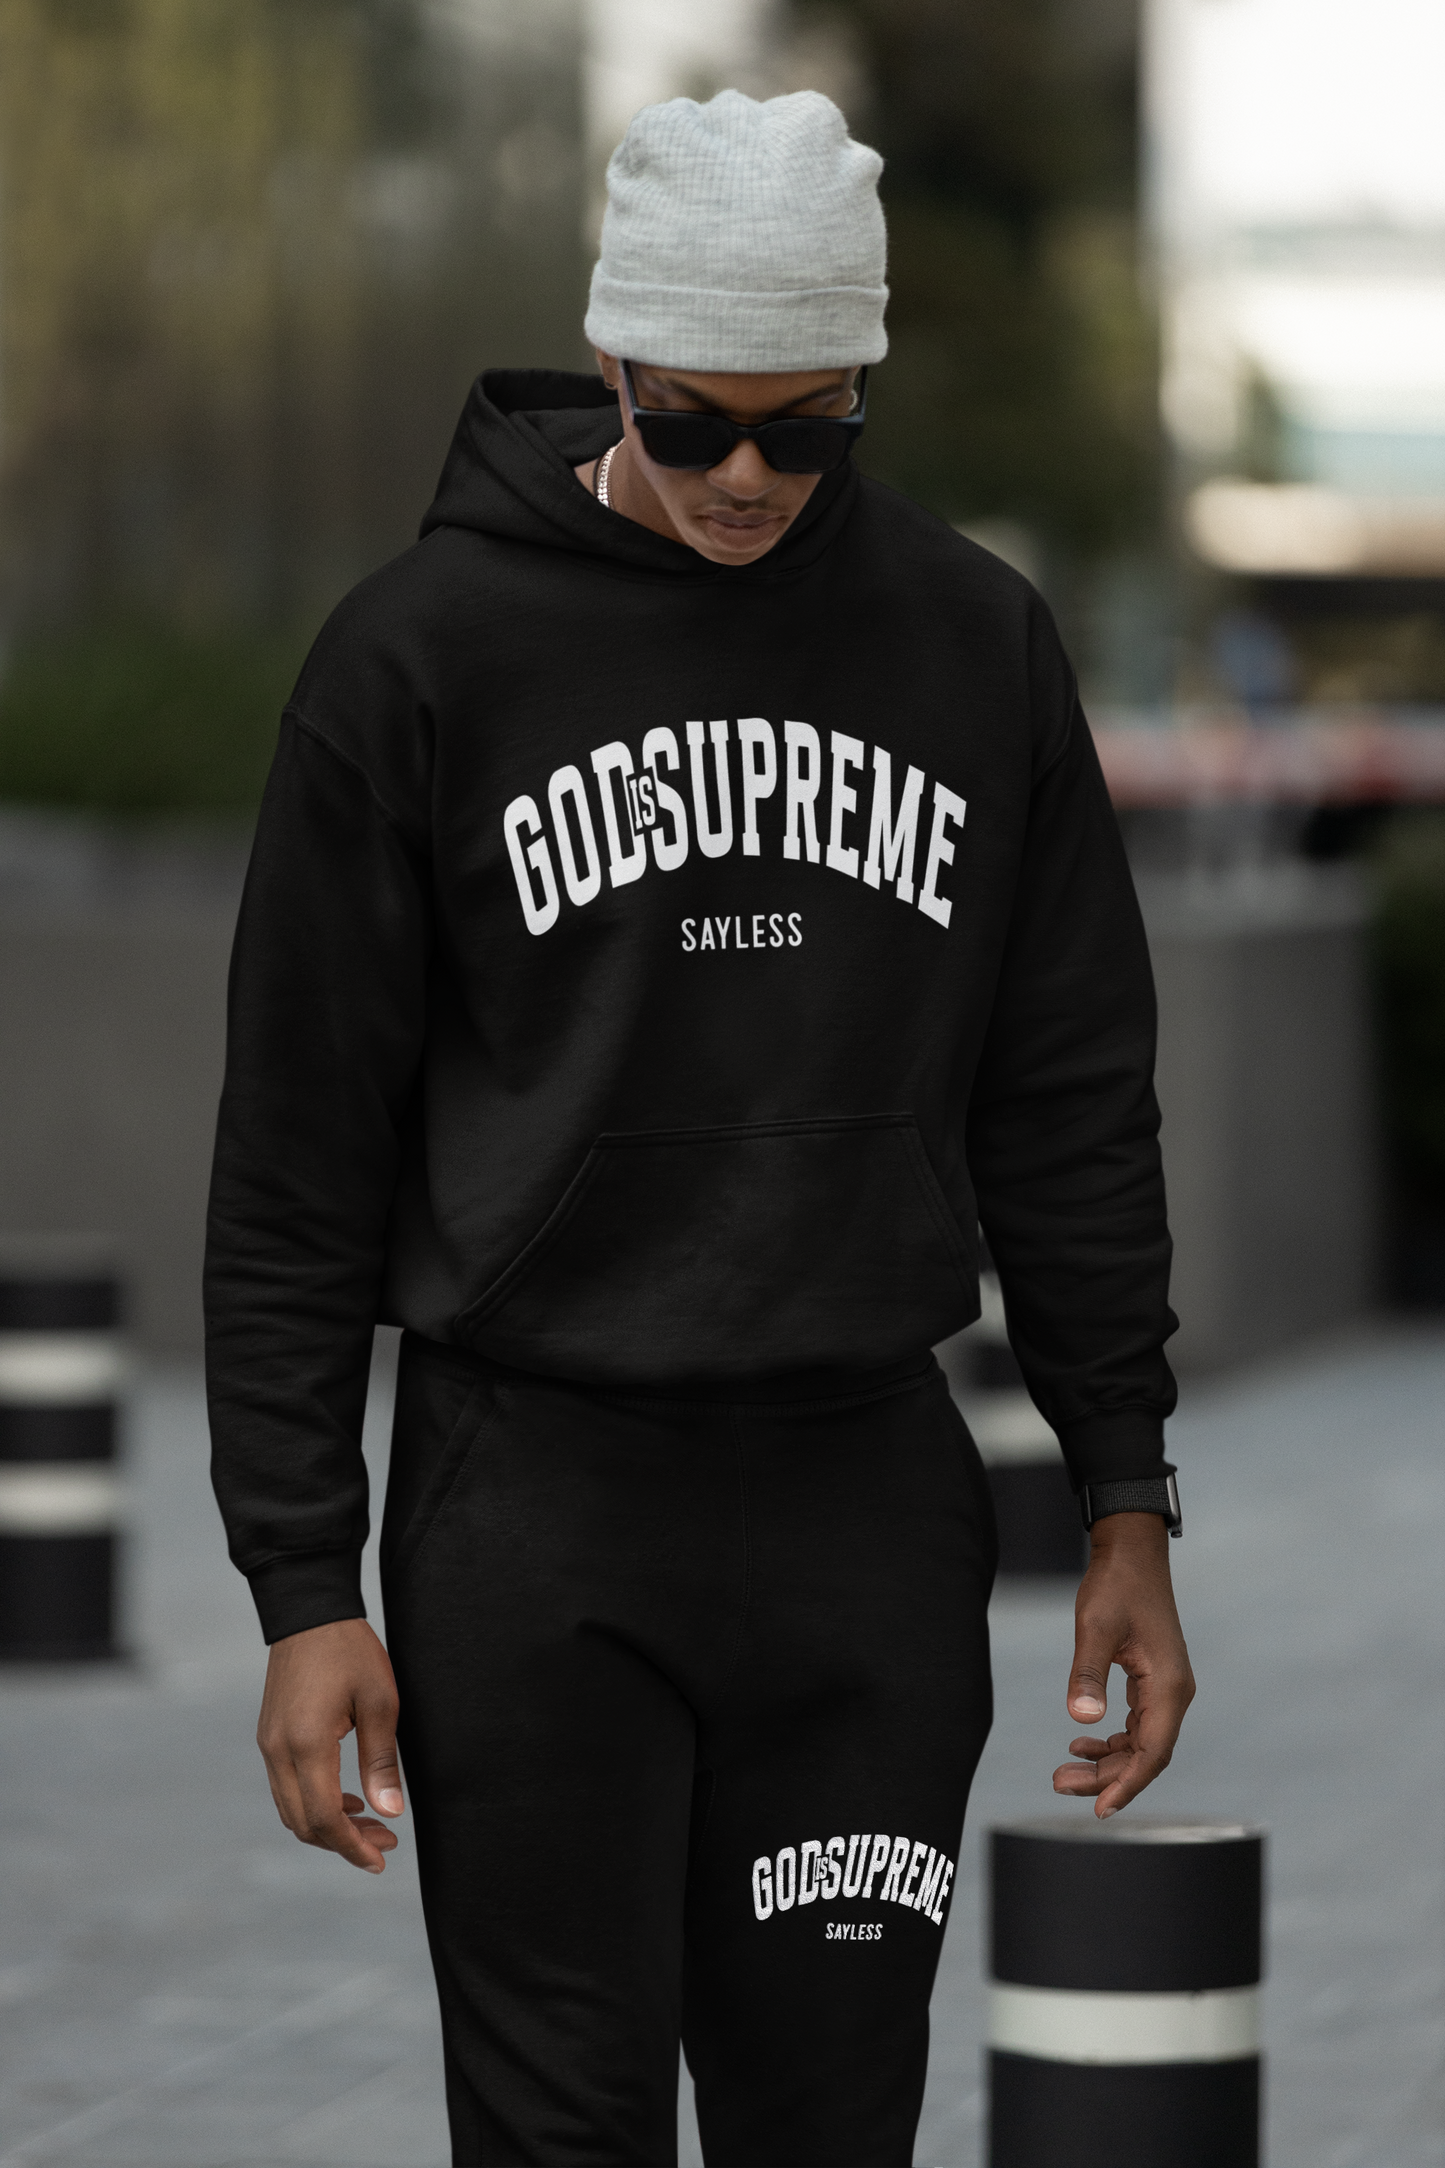 God is Supreme Sayless /White and Black Joggers